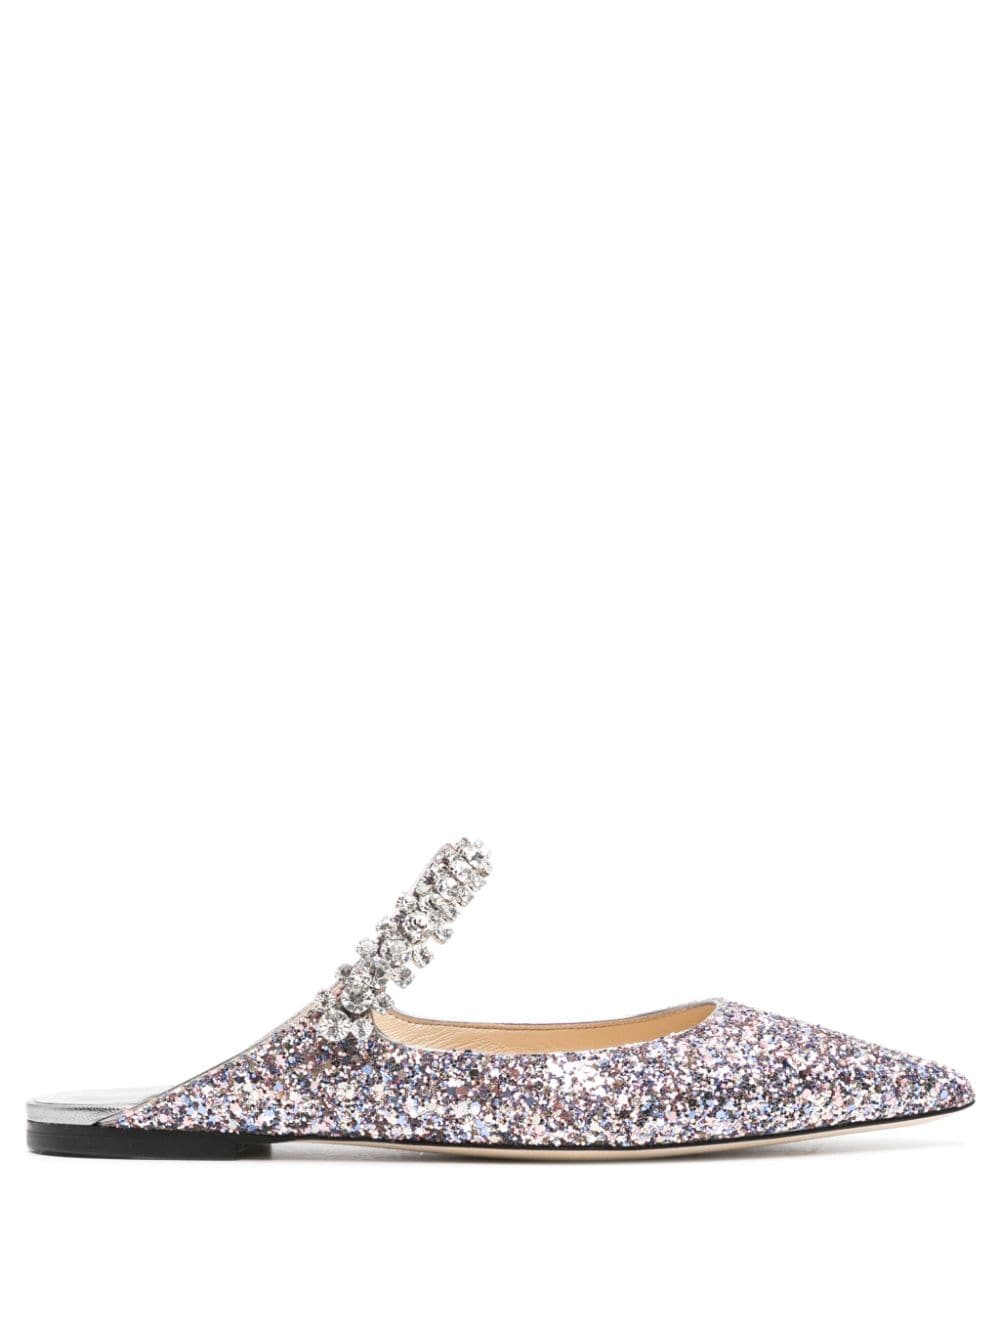 JIMMY CHOO Gray Crystal Pointed Toe Flats for Women